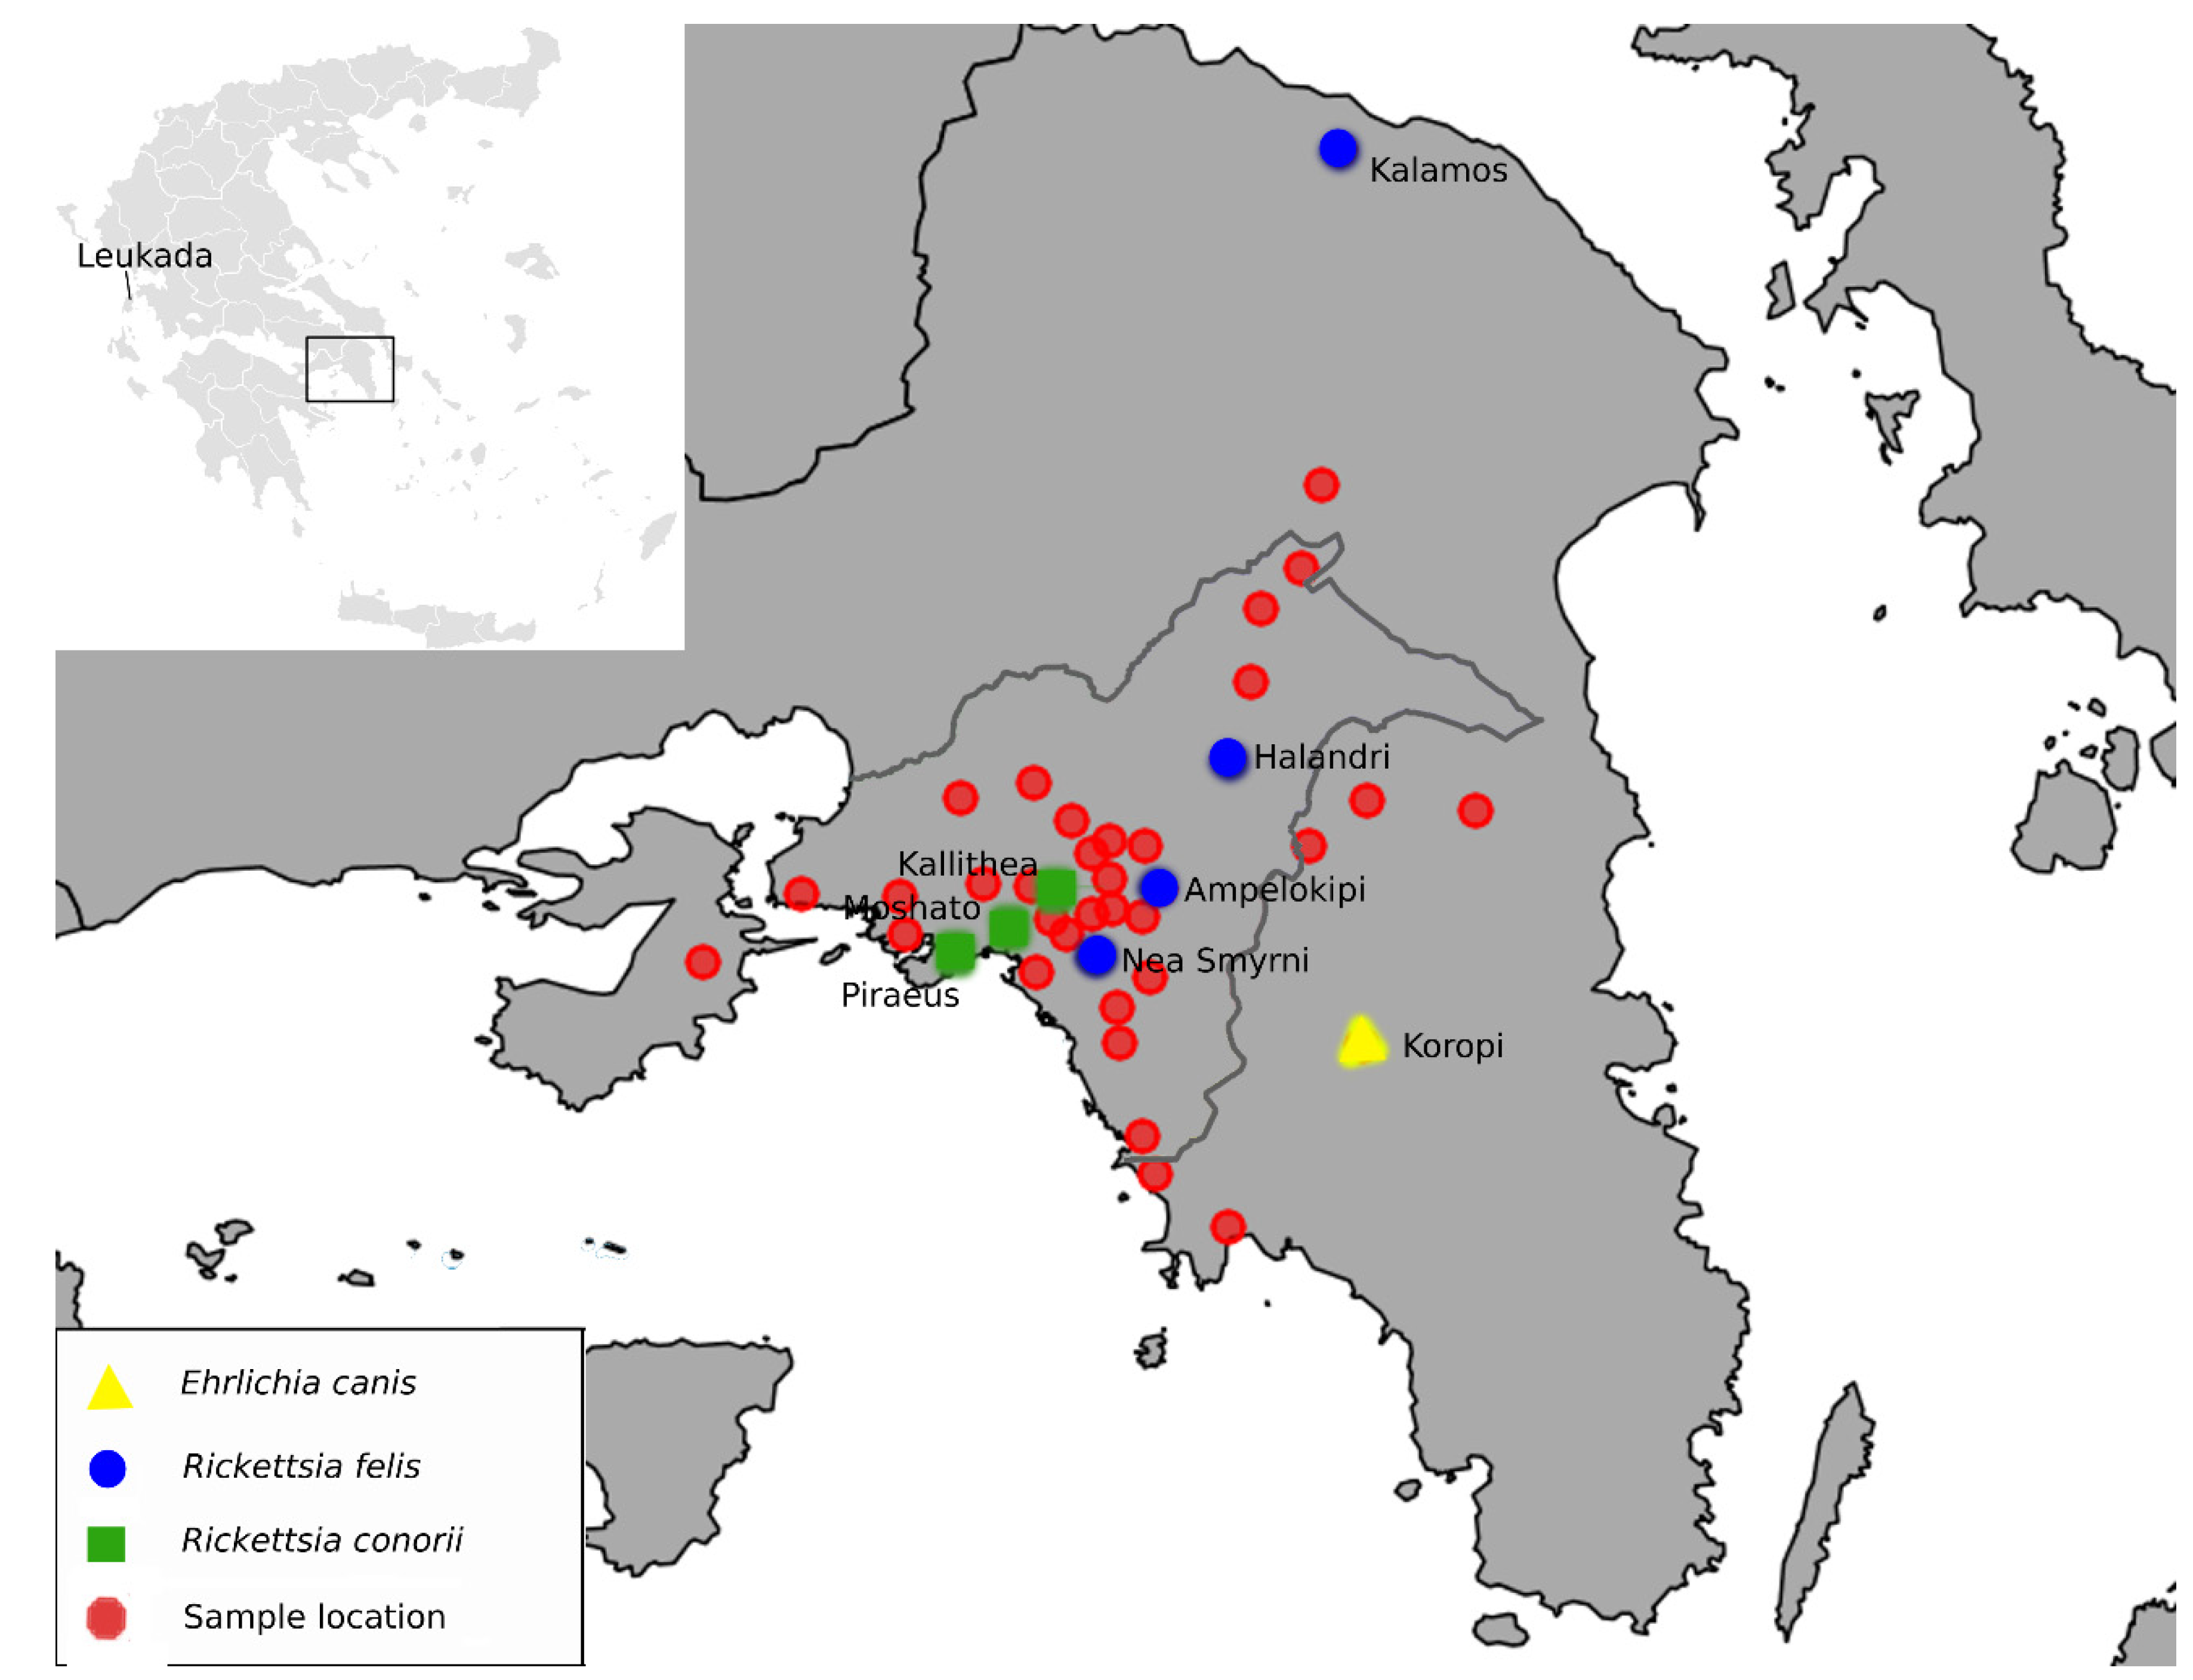 Zoonotic Diseases | Free Full-Text | Rickettsial Agents Associated with  Ectoparasites in Attica, Greece